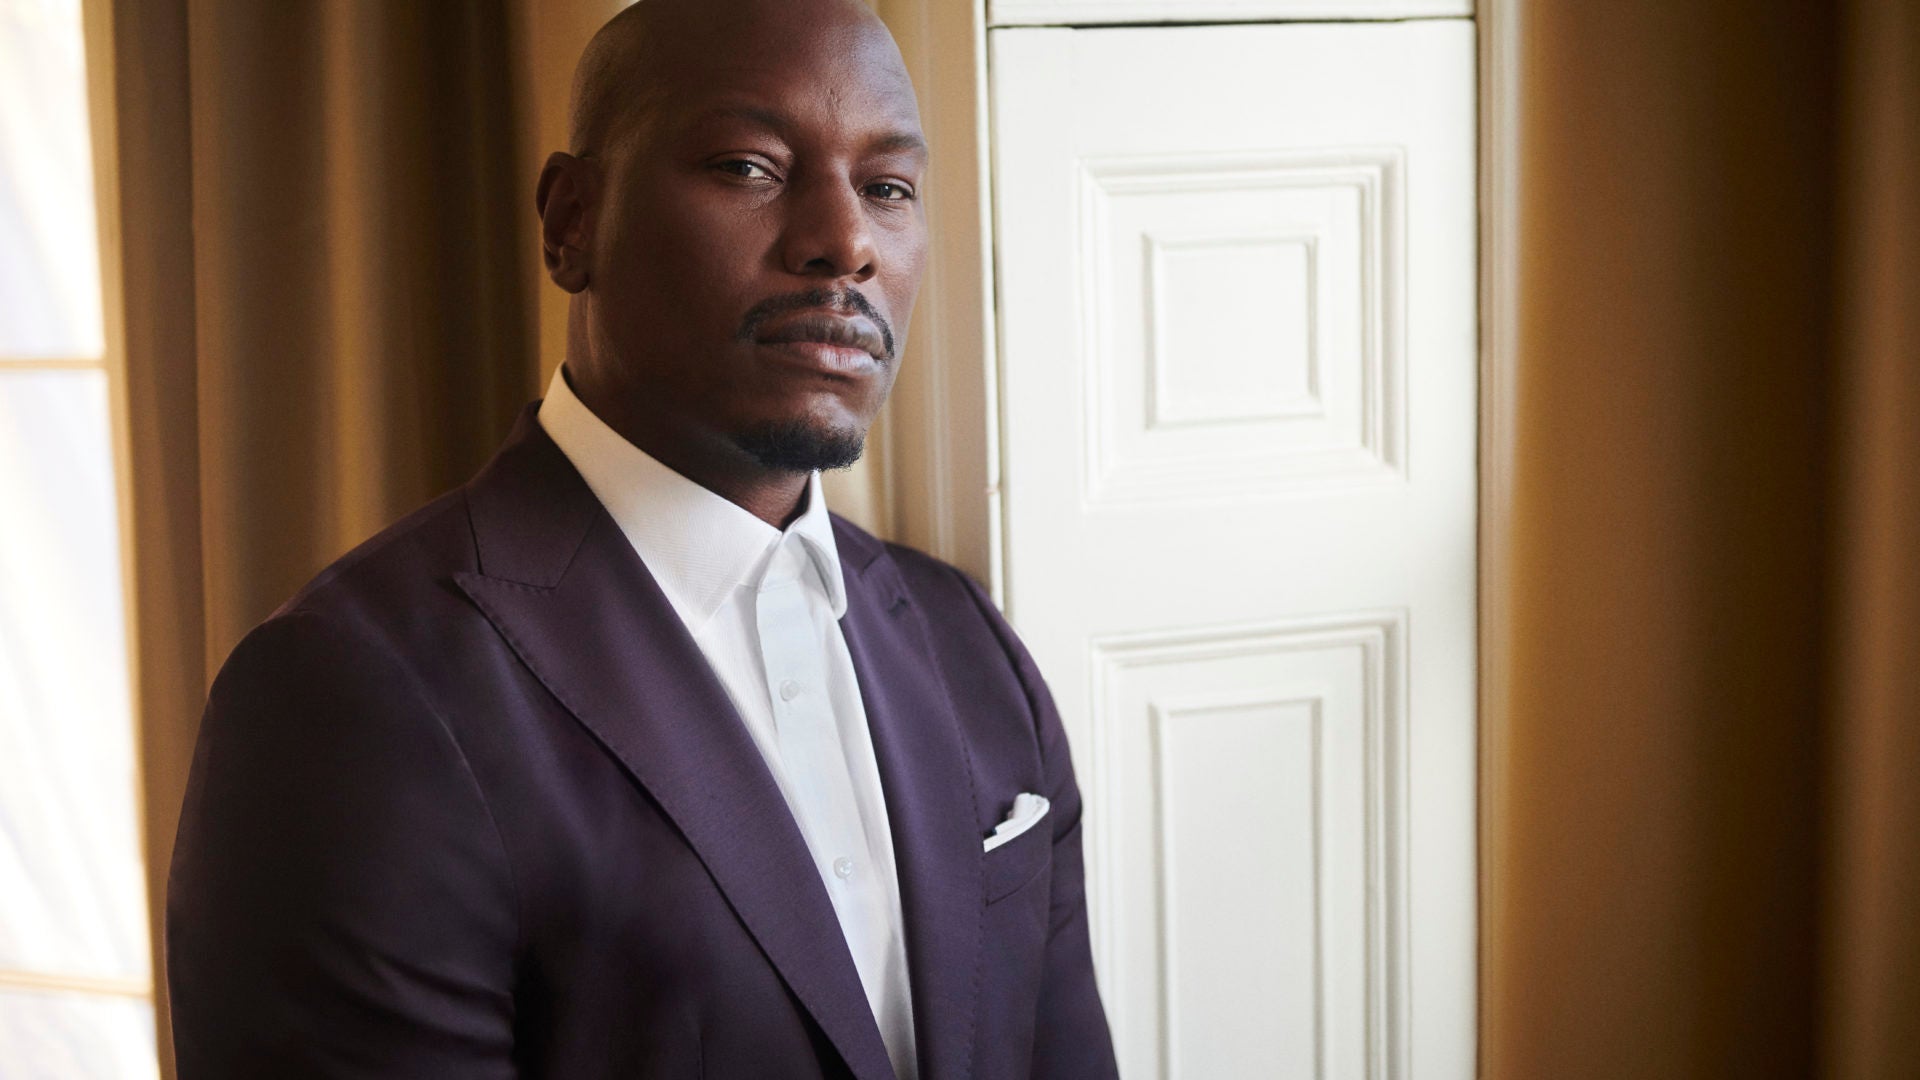 Tyrese Credits His Faith For Fixing The 'Mess' In His Life